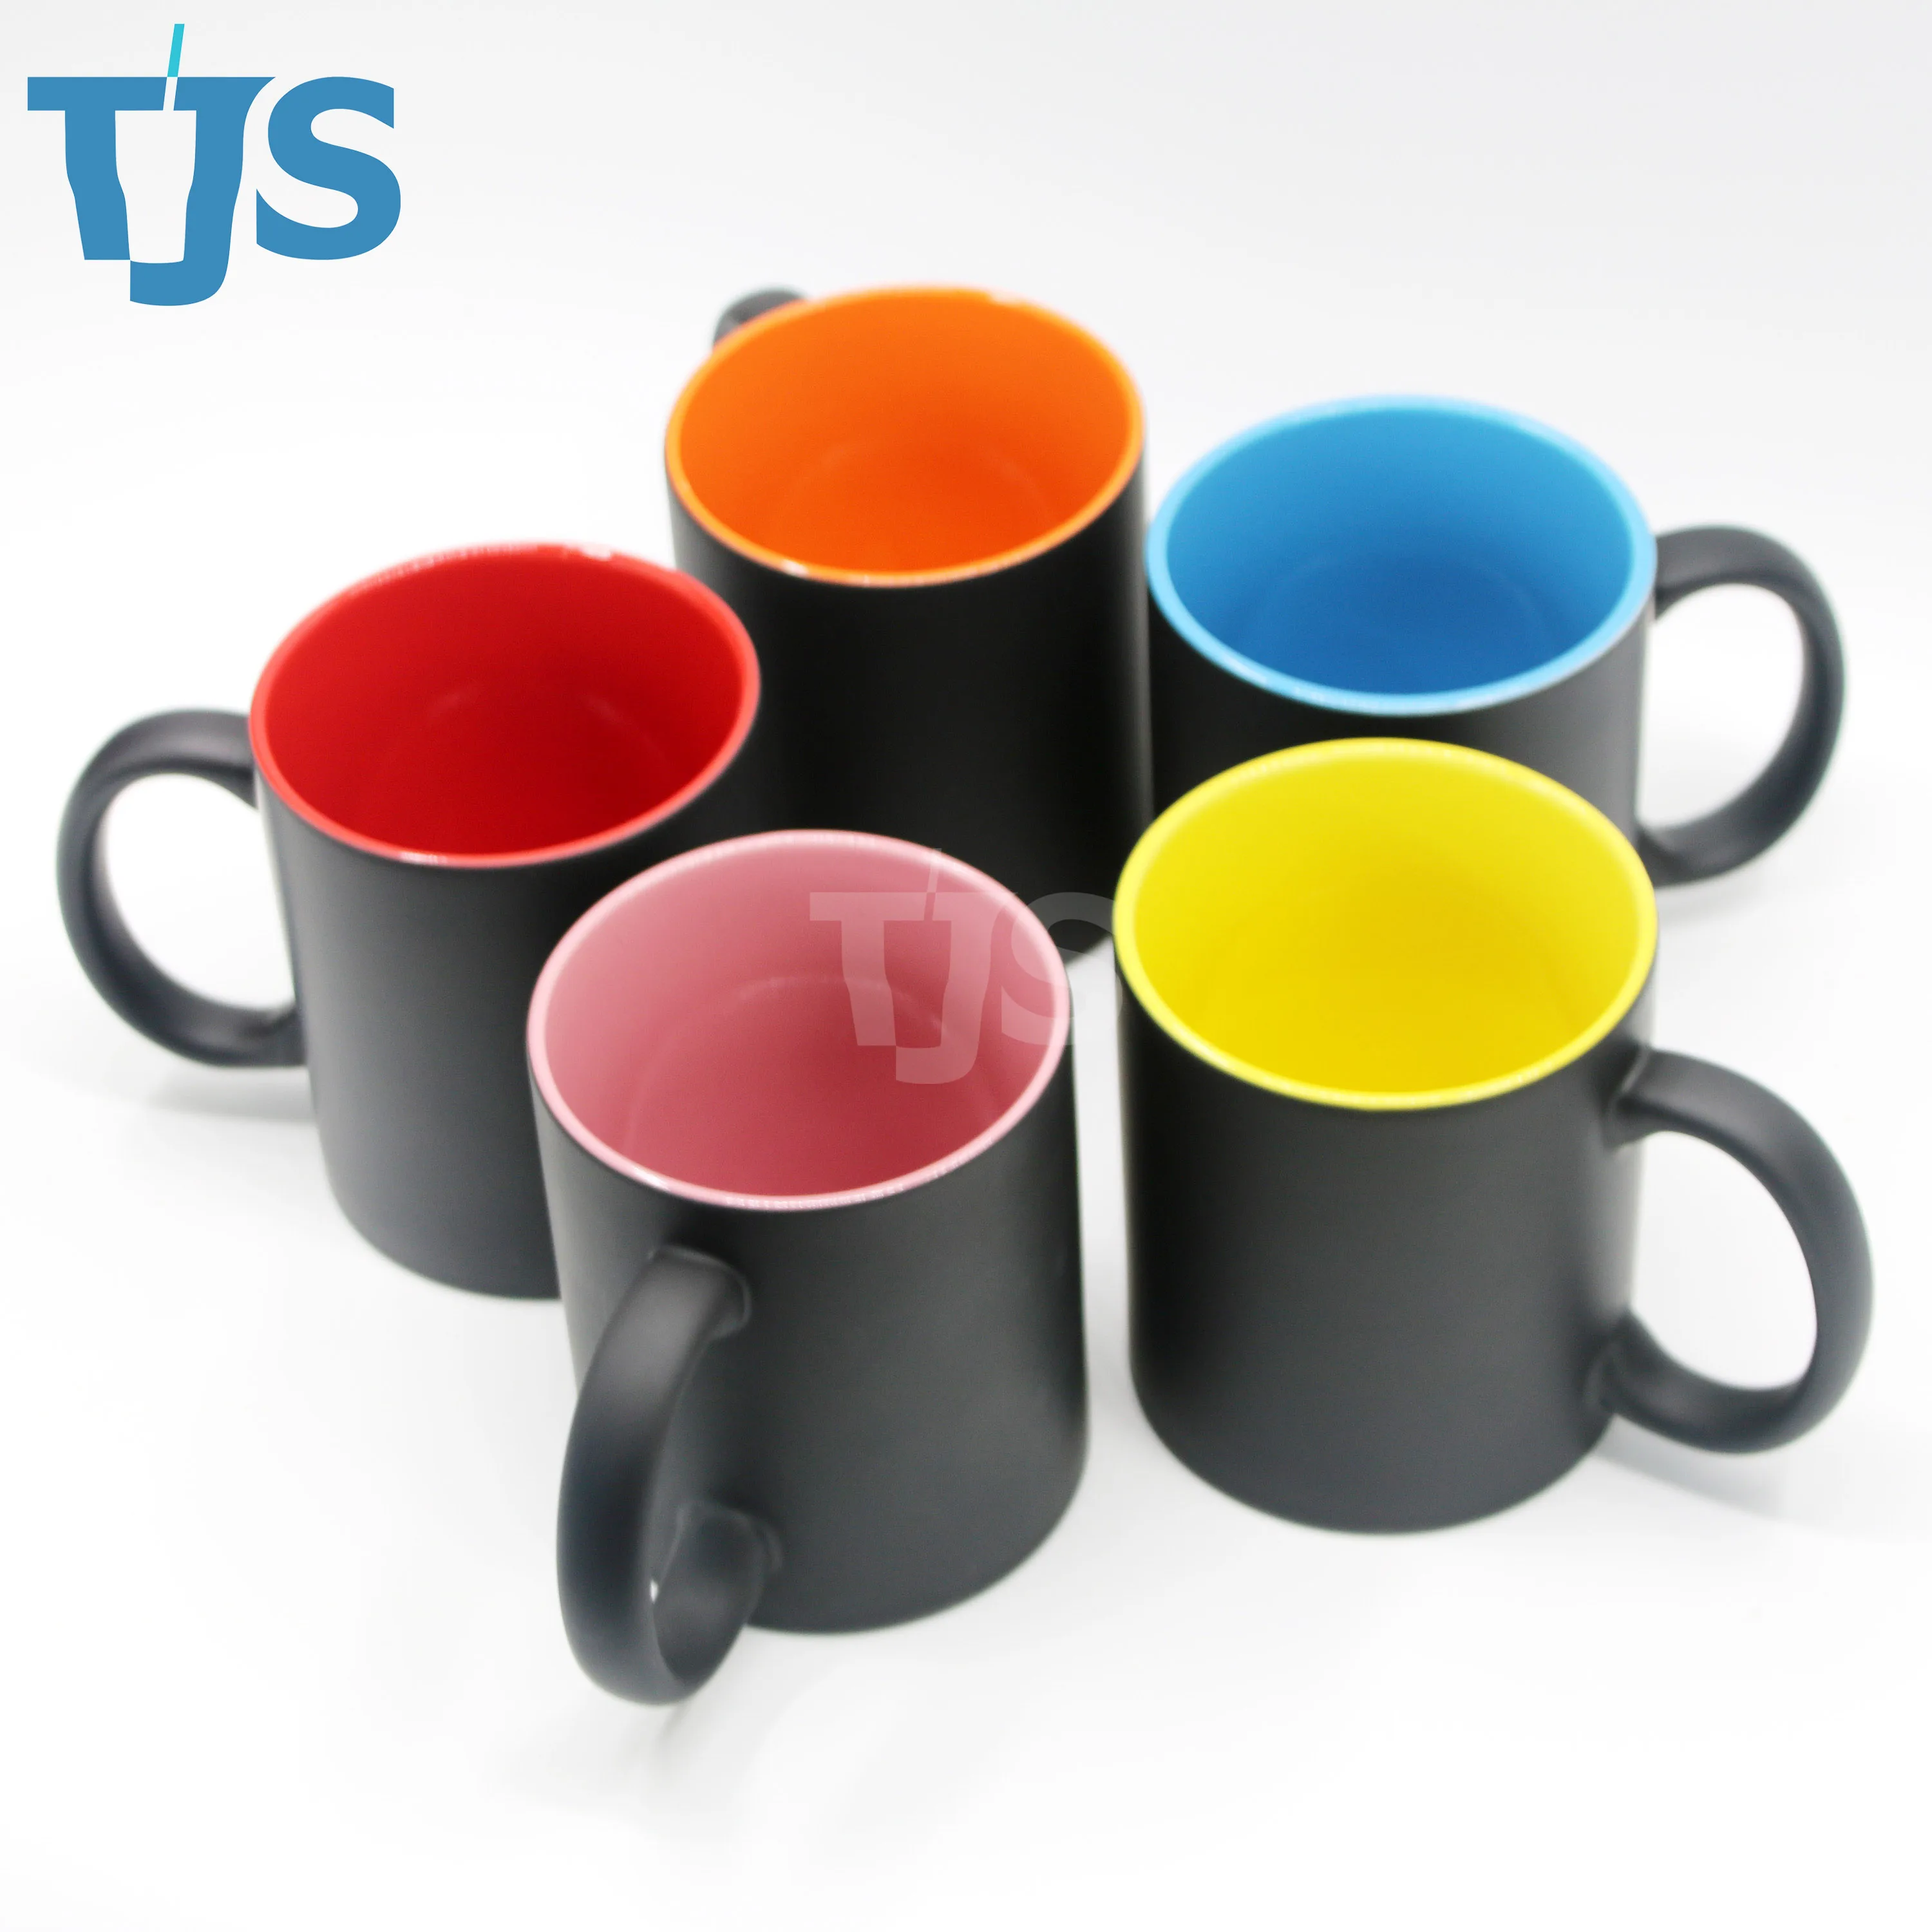 

wholesale cheap 11oz magical ceramic coffee mug color changing blanks mugs for sublimation, Red black orange yellow blue